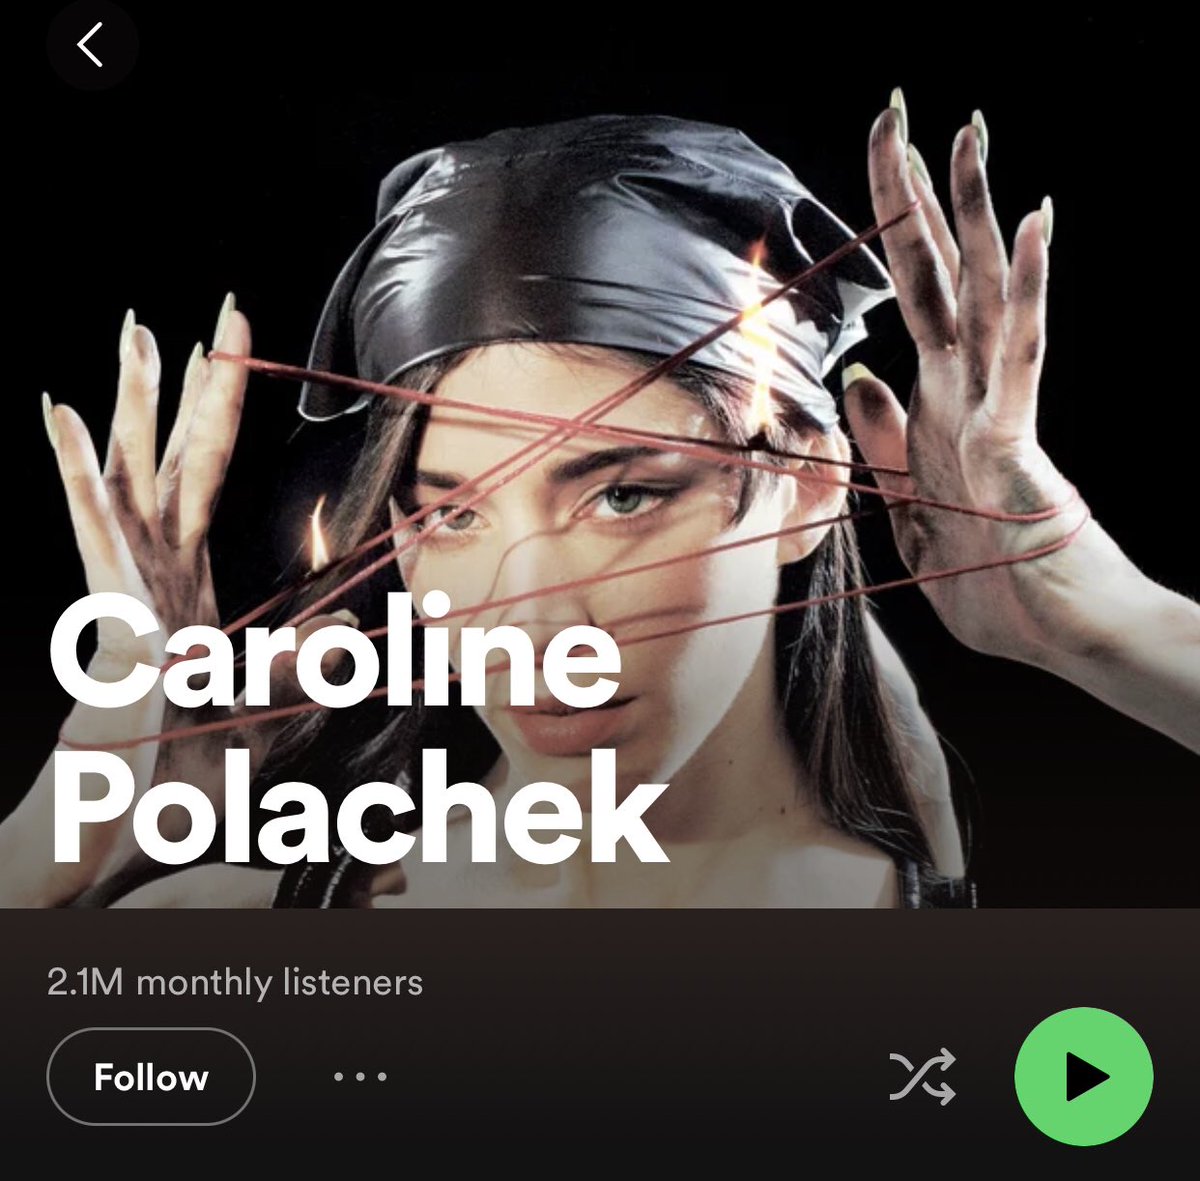 Johann Sebastian Bach reaches 8.7M monthly Spotify listeners while resident nail bitter Caroline Polachek once again is left in the dust.